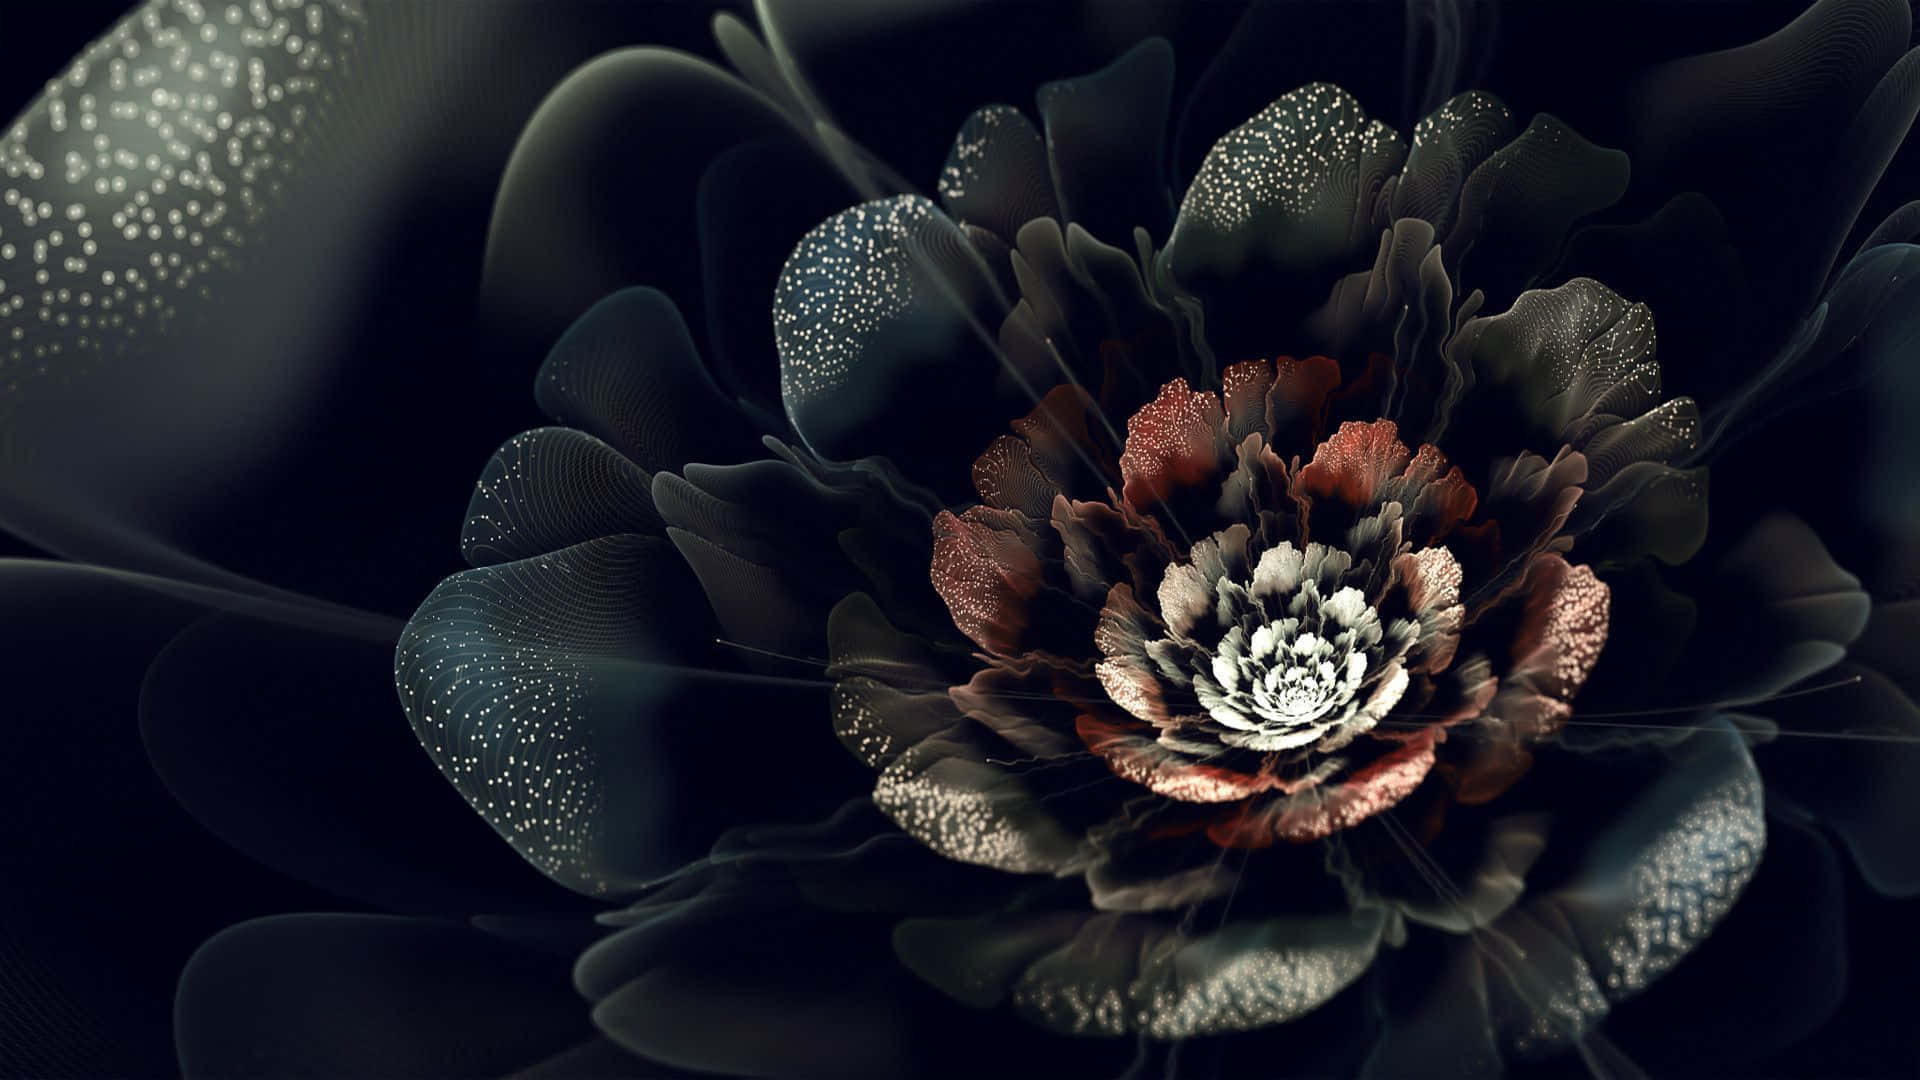 Gothic Flowers With Black Petals Wallpaper